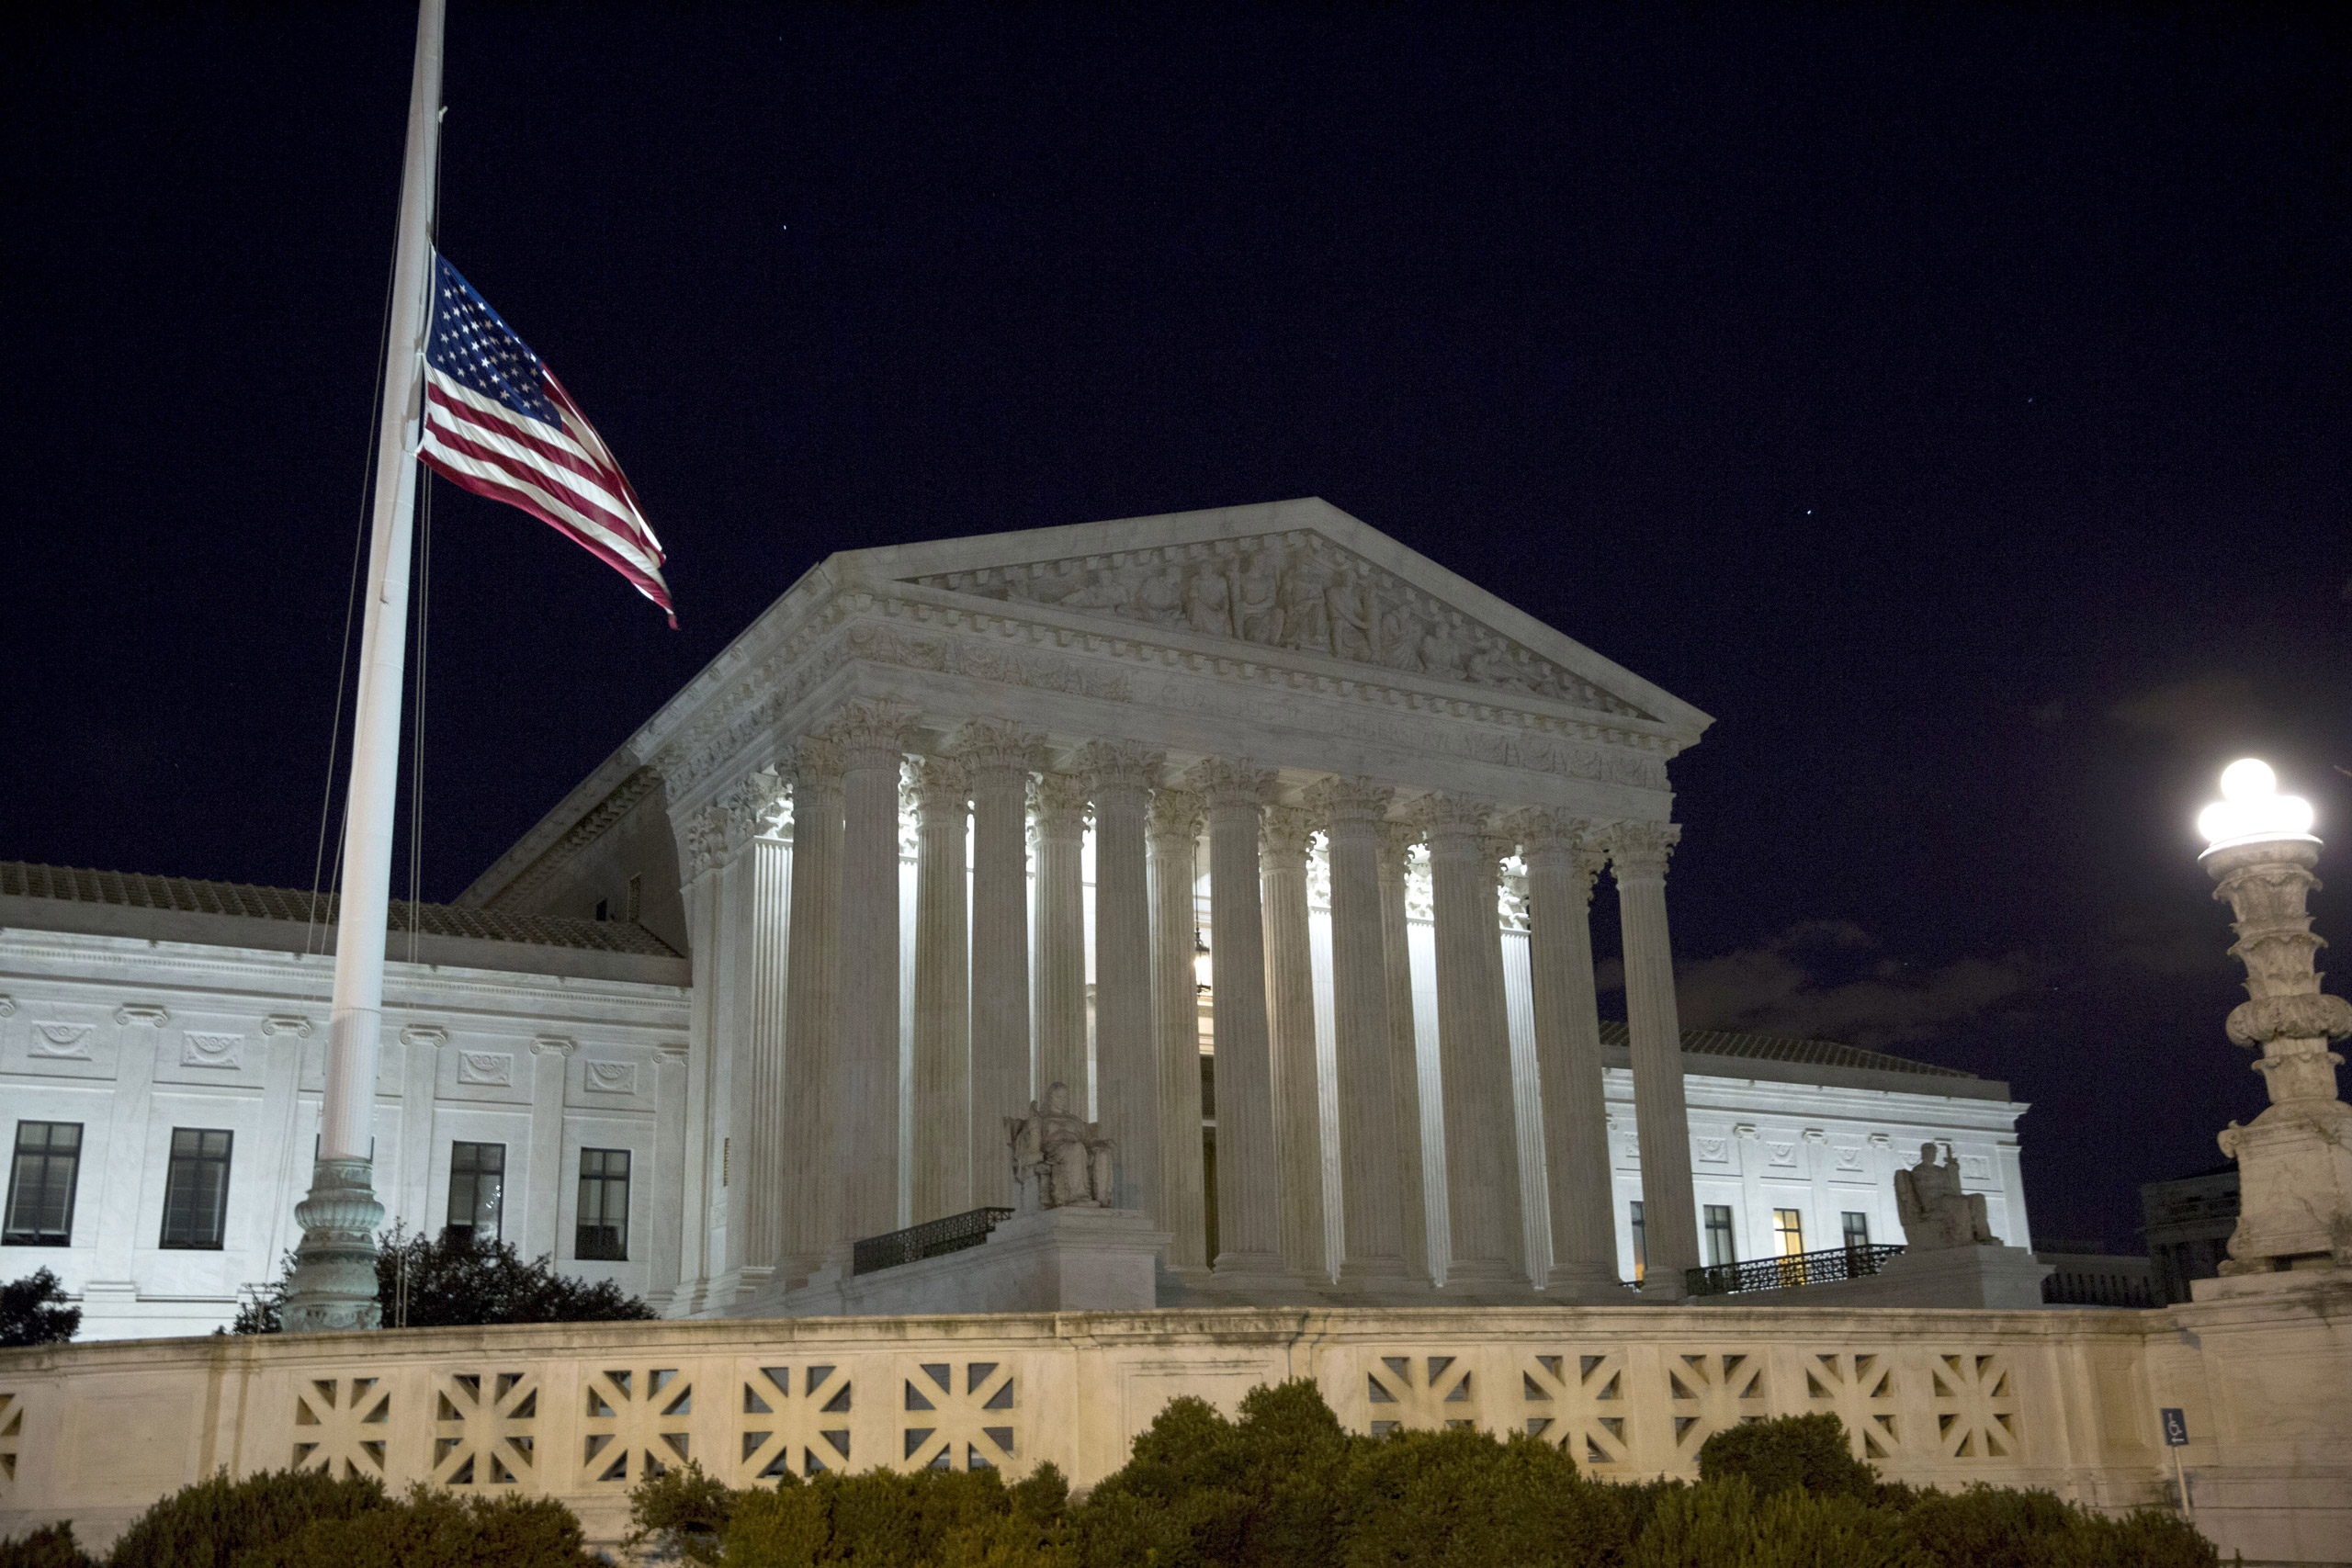 The American flag flies at half mast after the death of Supreme Court Justice Antonin Scalia at the U.S. Supreme Court in Washington on Feb.13, 2016. (Drew Angerer—Getty Images)